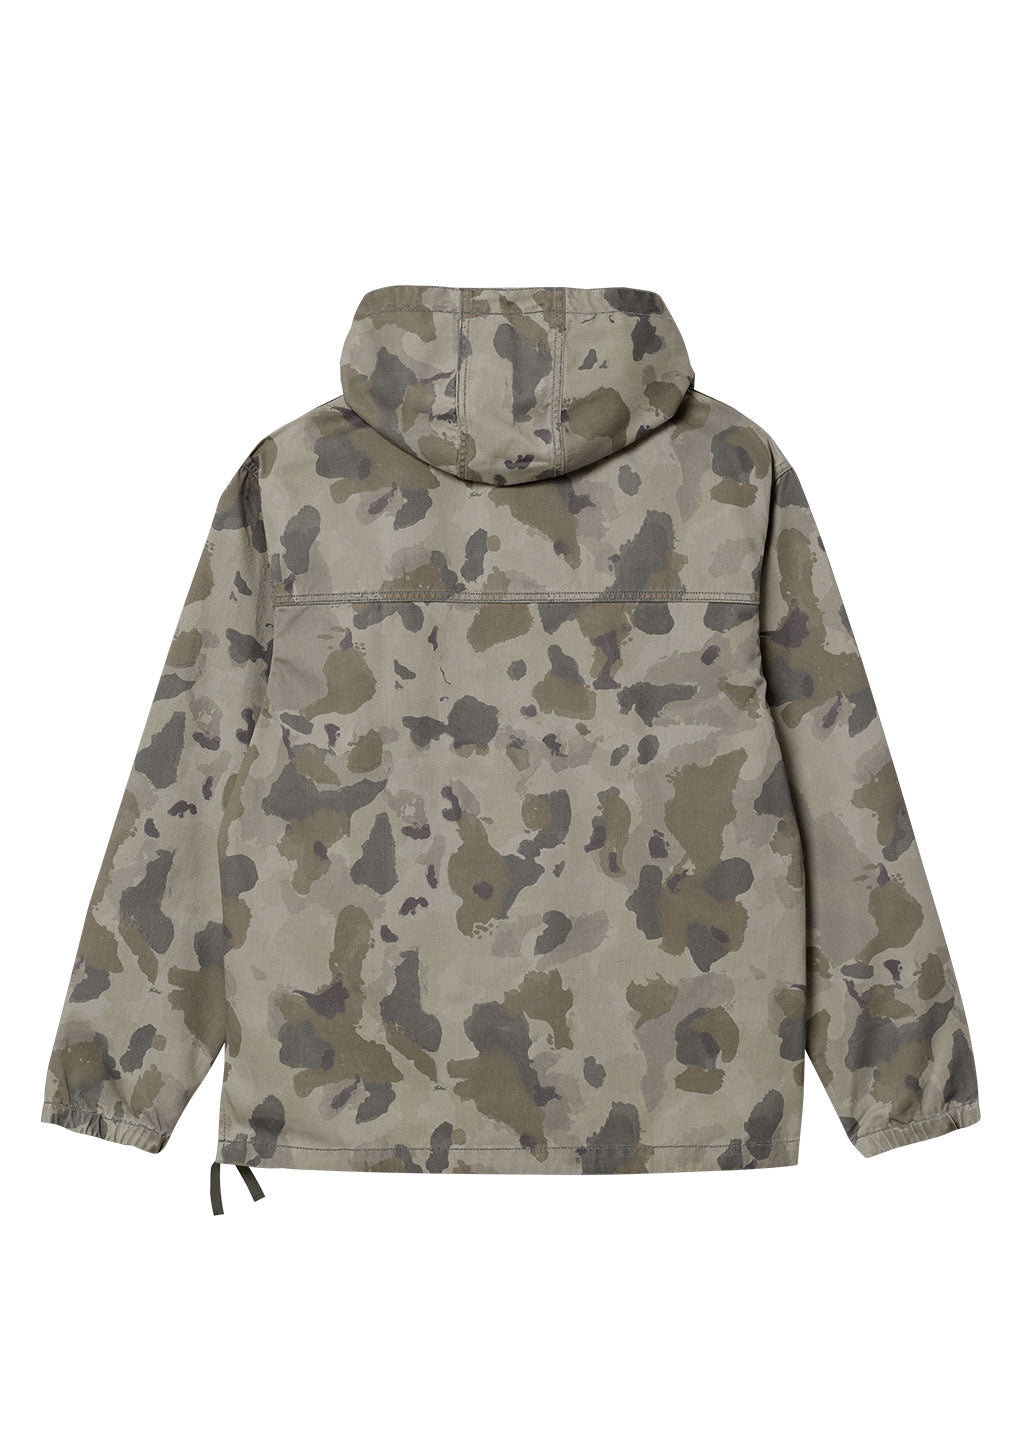 Carhartt WIP - Hooded Carson Pullover - Camo Tide/Thyme Stone Washed - Hardpressed Print Studio